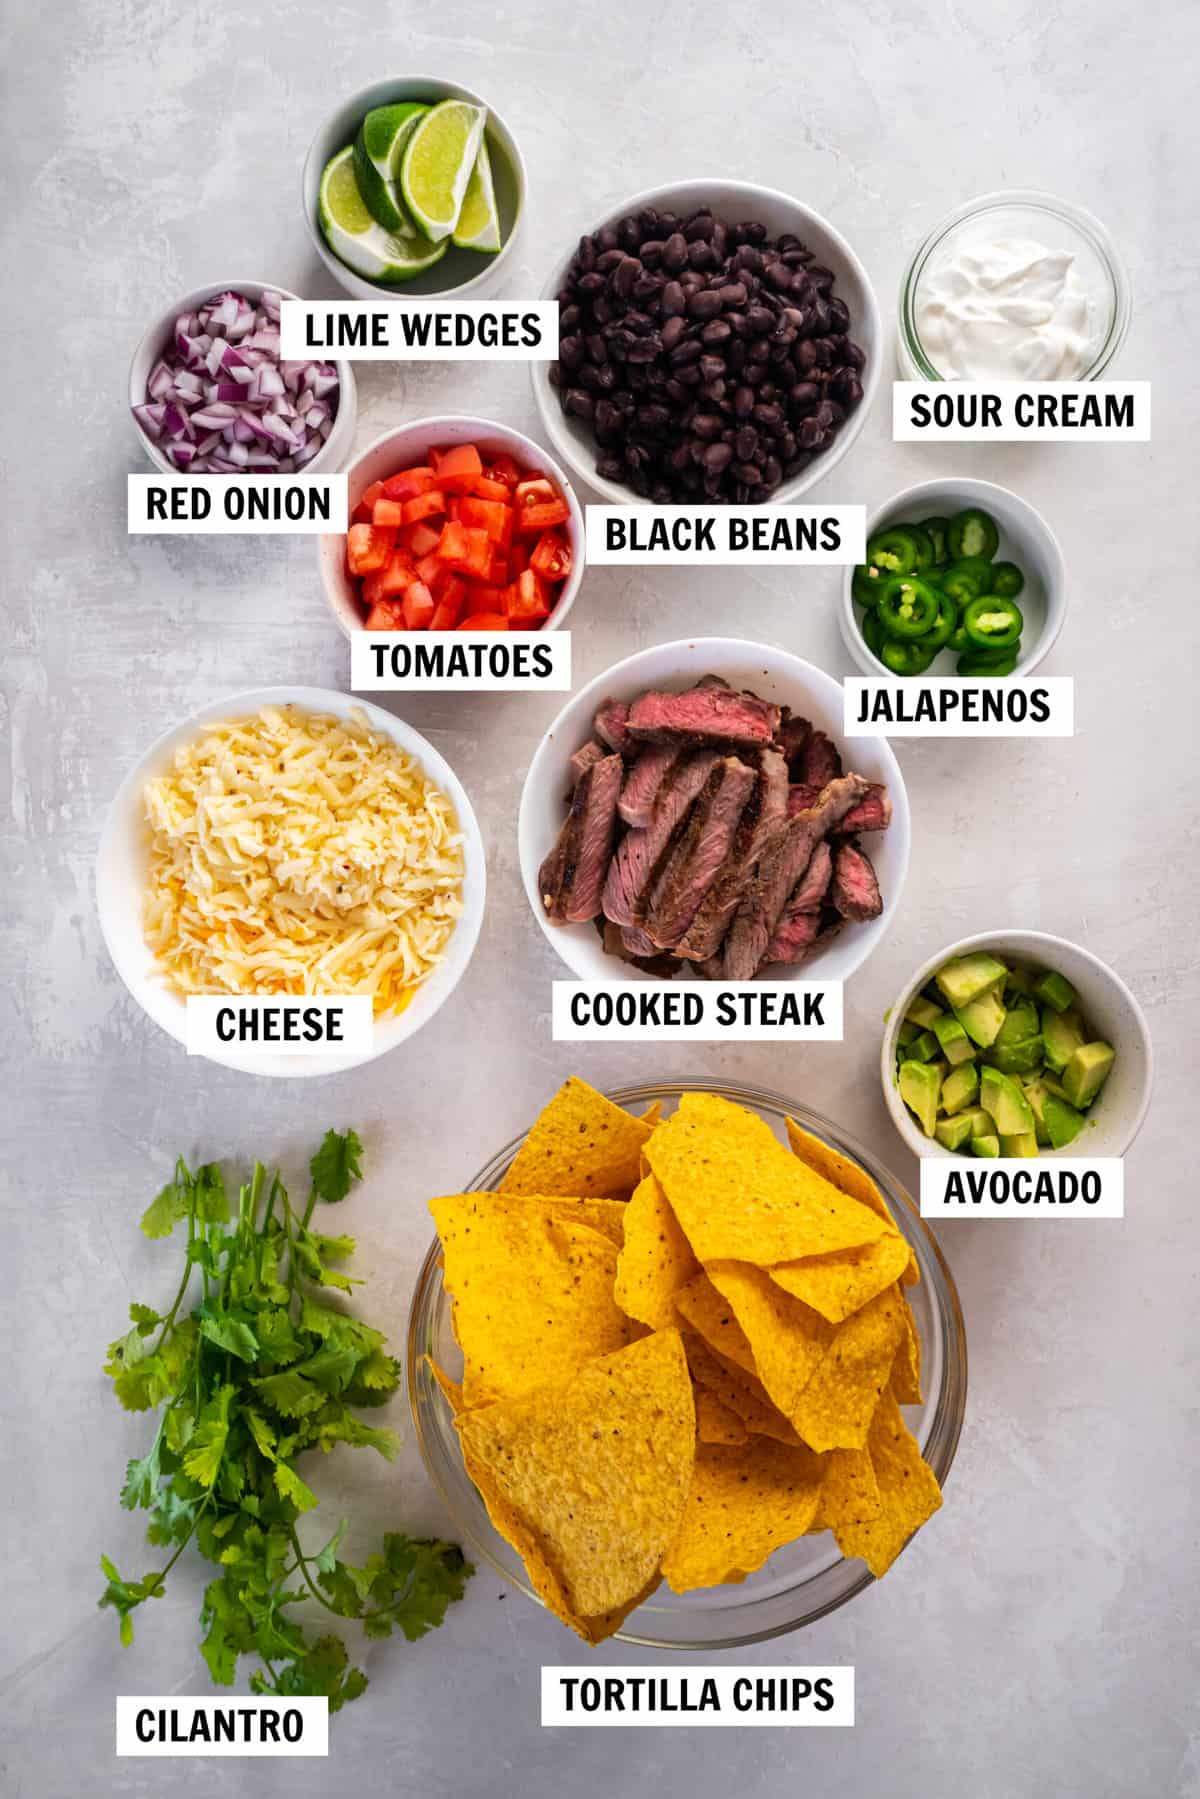 All of the ingredients for steak nachos on a white tabletop including cooked steak, tortilla chips, cheese, onion, tomato, jalapenos, avocado, sour cream and cilantro.